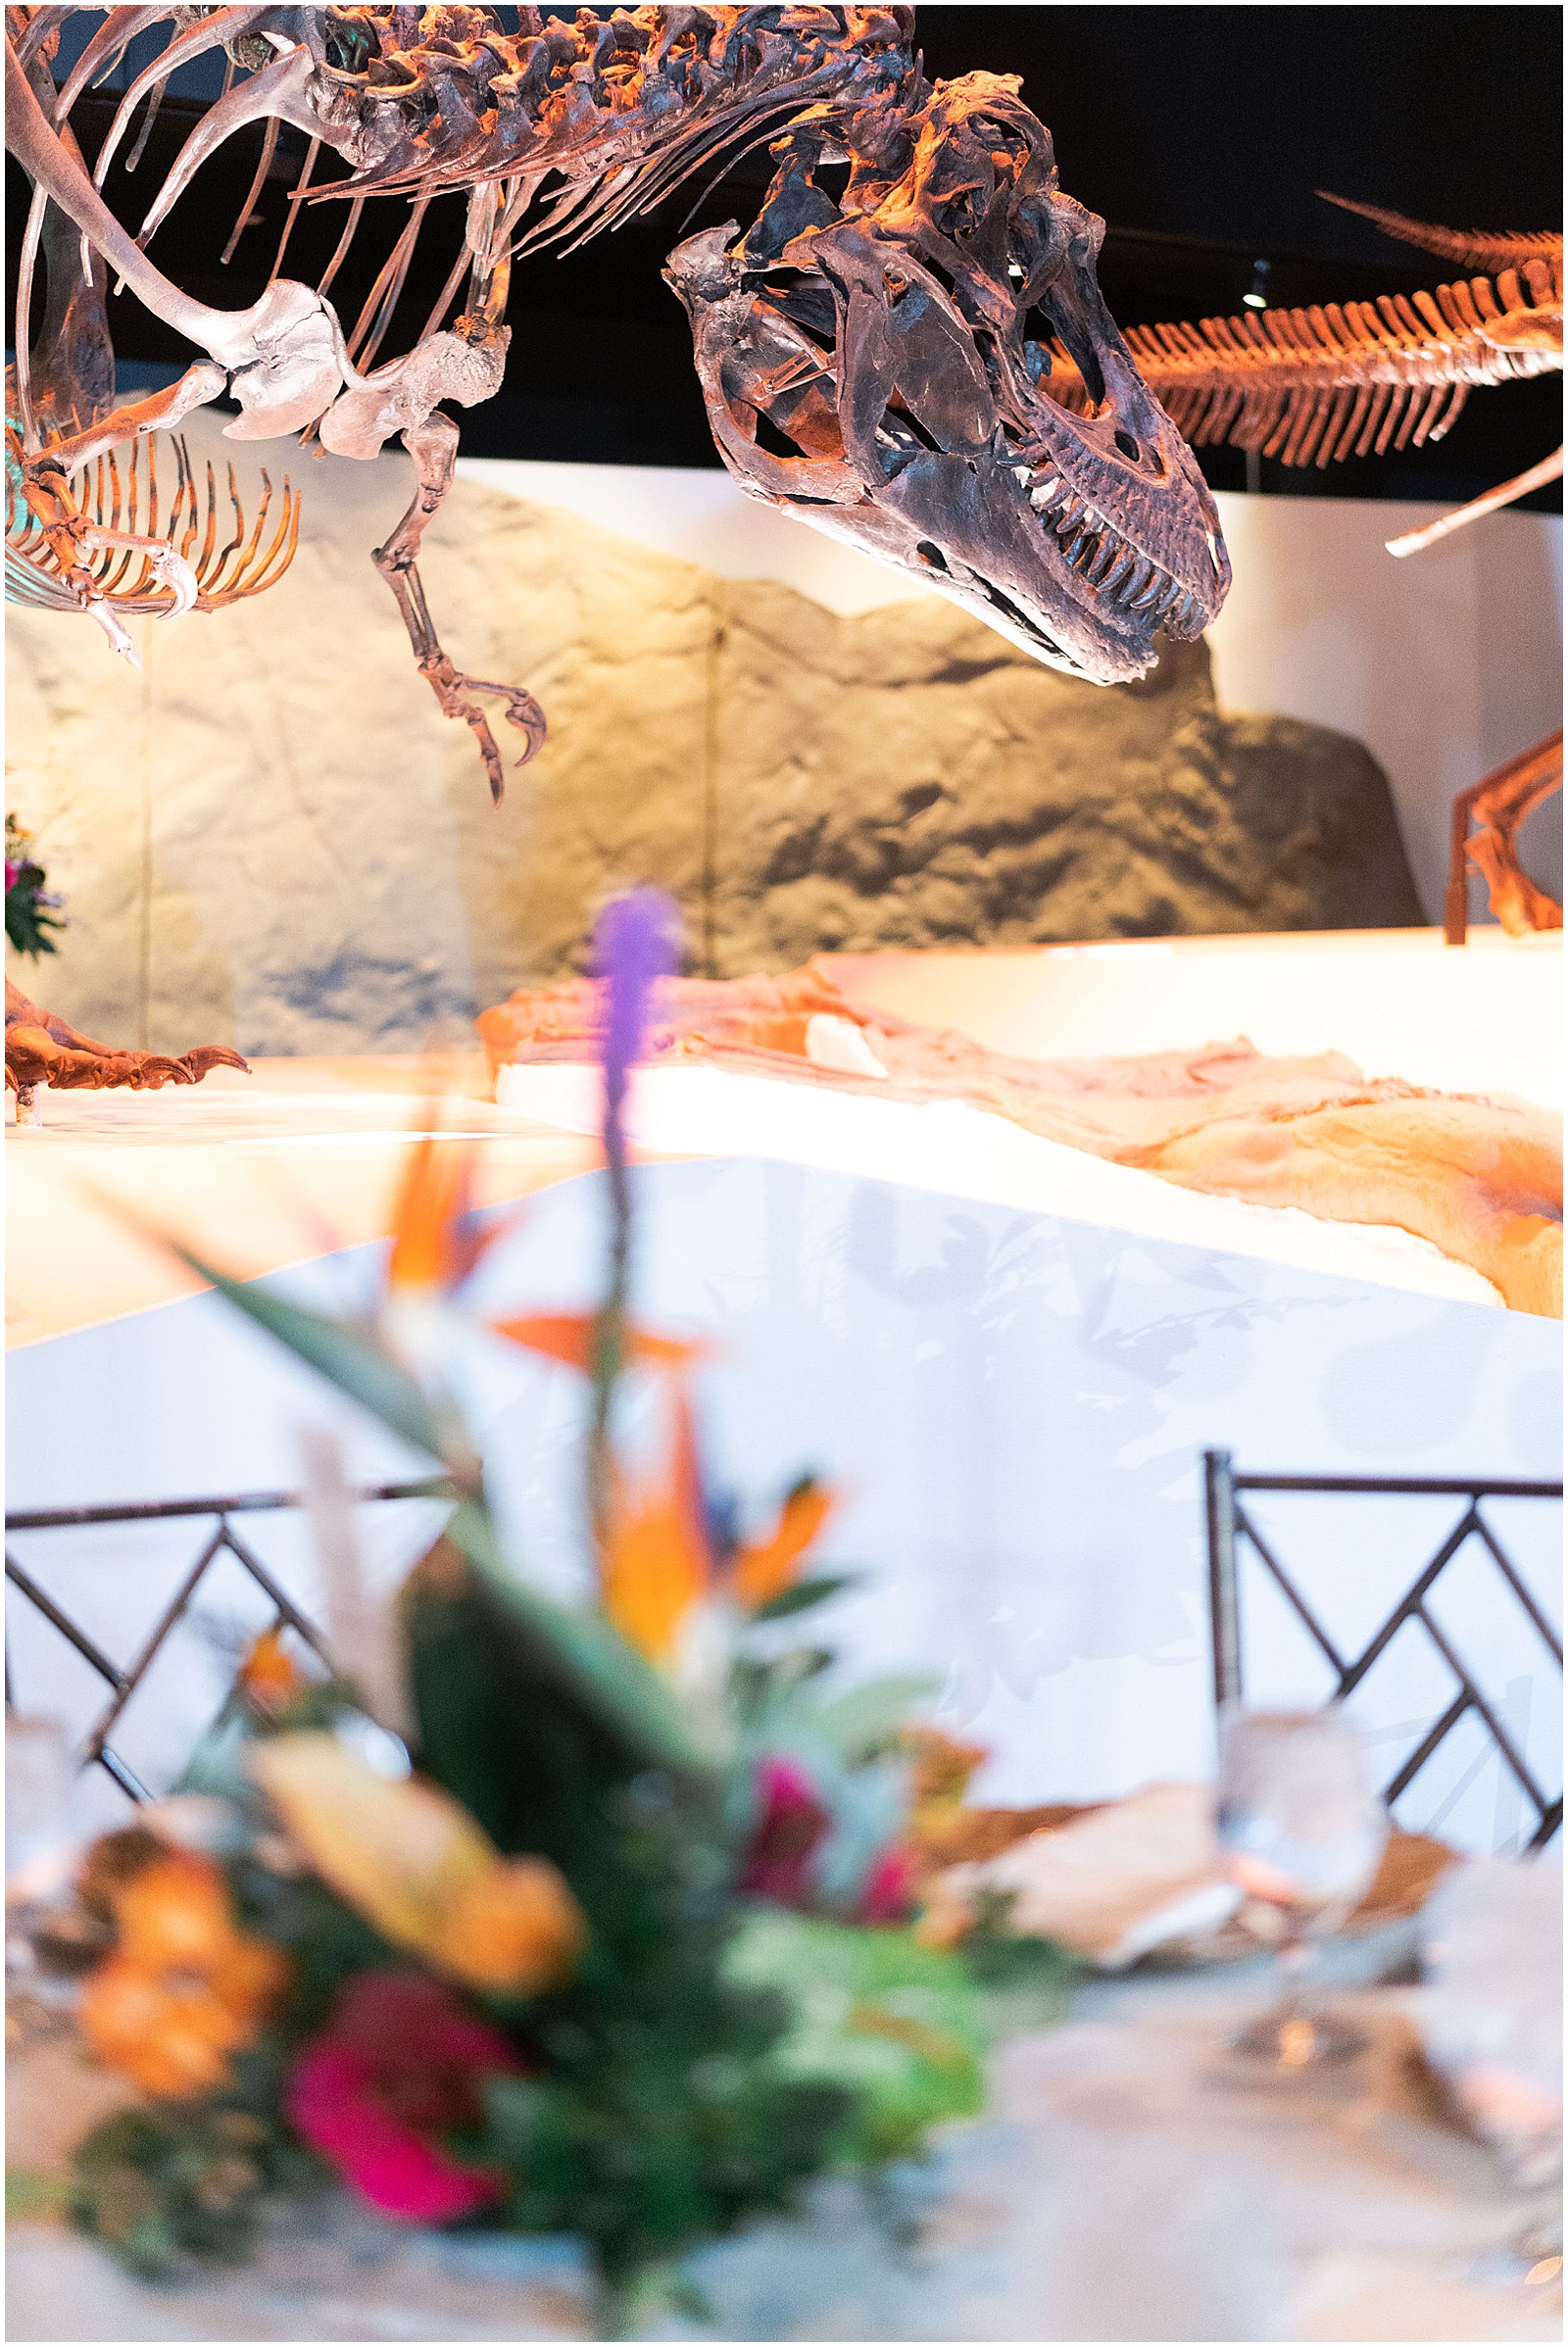 Dinosaur wedding details at the Houston Museum of Natural Science - Geologist Wedding Details | Swish and Click Photography